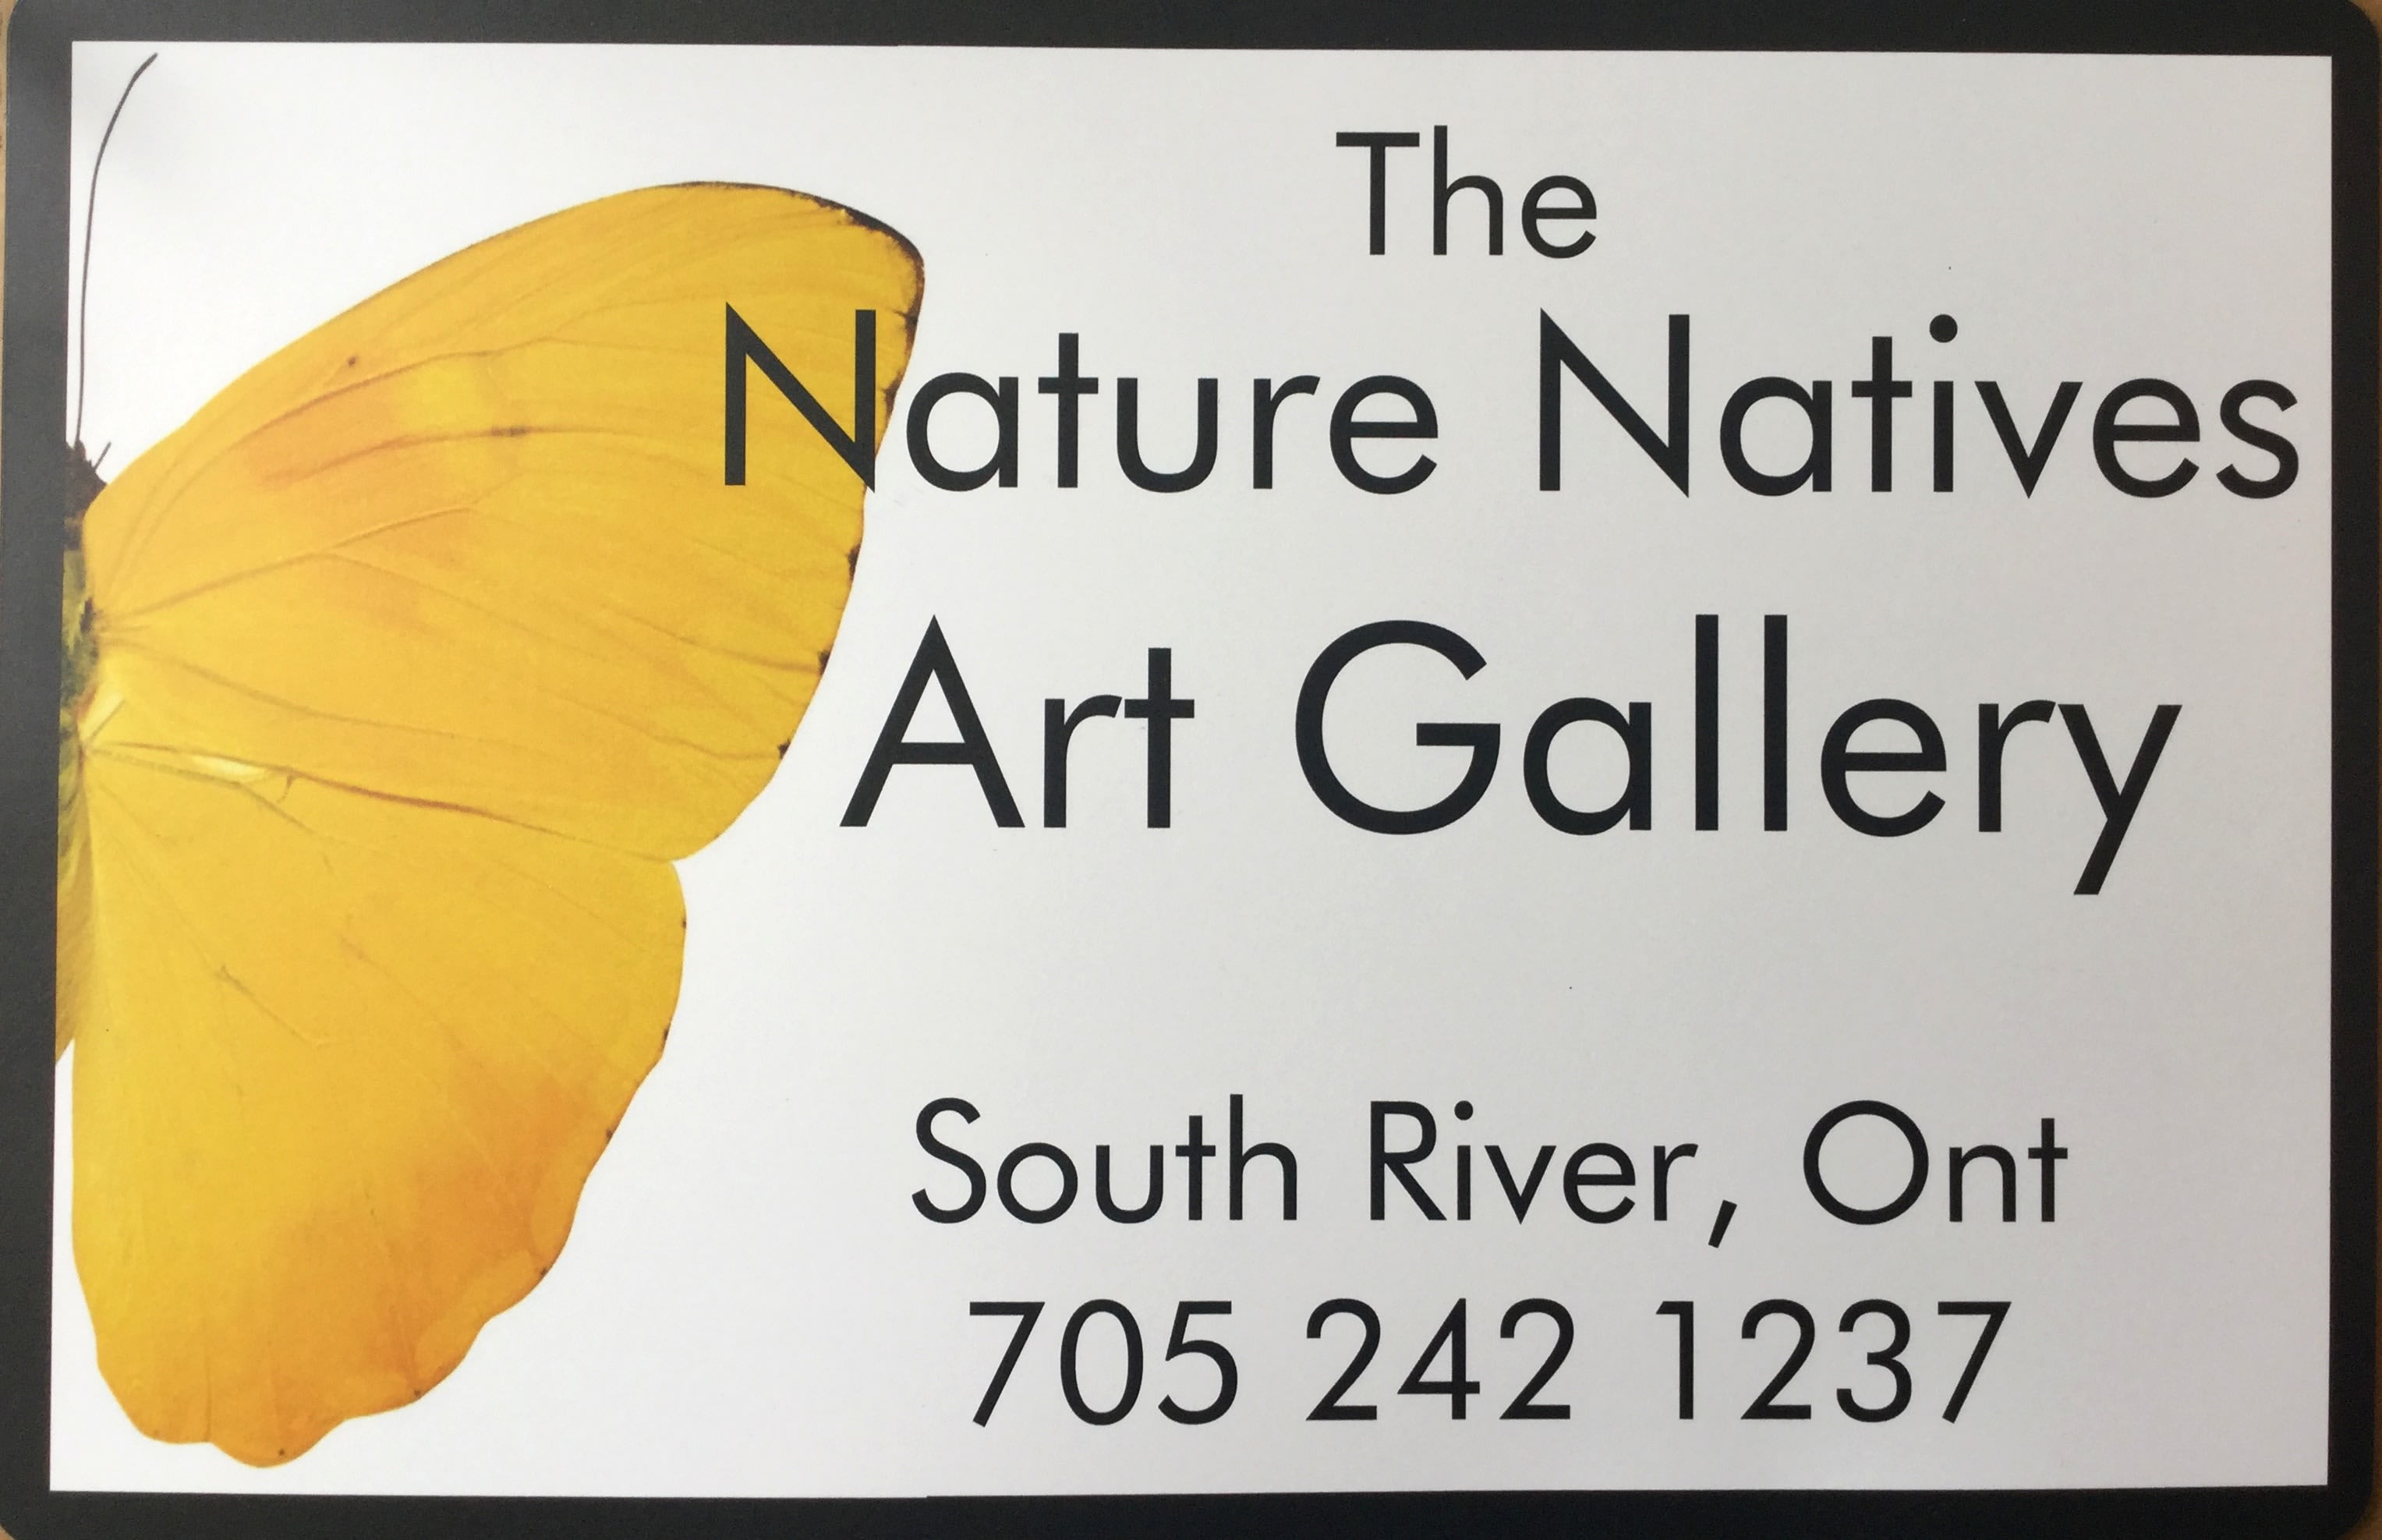 The Nature Natives Art Gallery